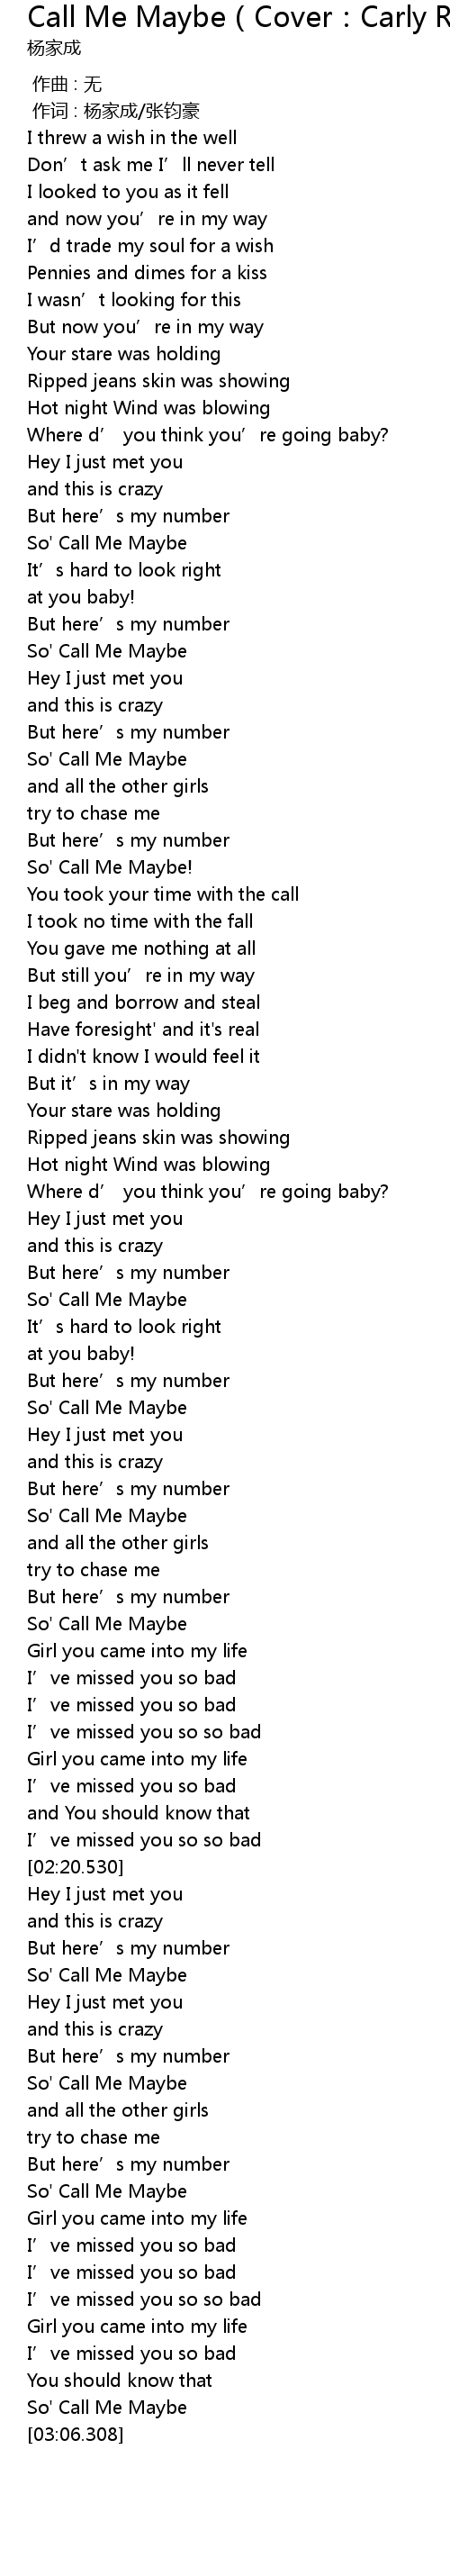 Call Me Maybe Cover Carly Rae Jepsen Call Me Maybe Cover Carly Rae Jepsen Lyrics Follow Lyrics